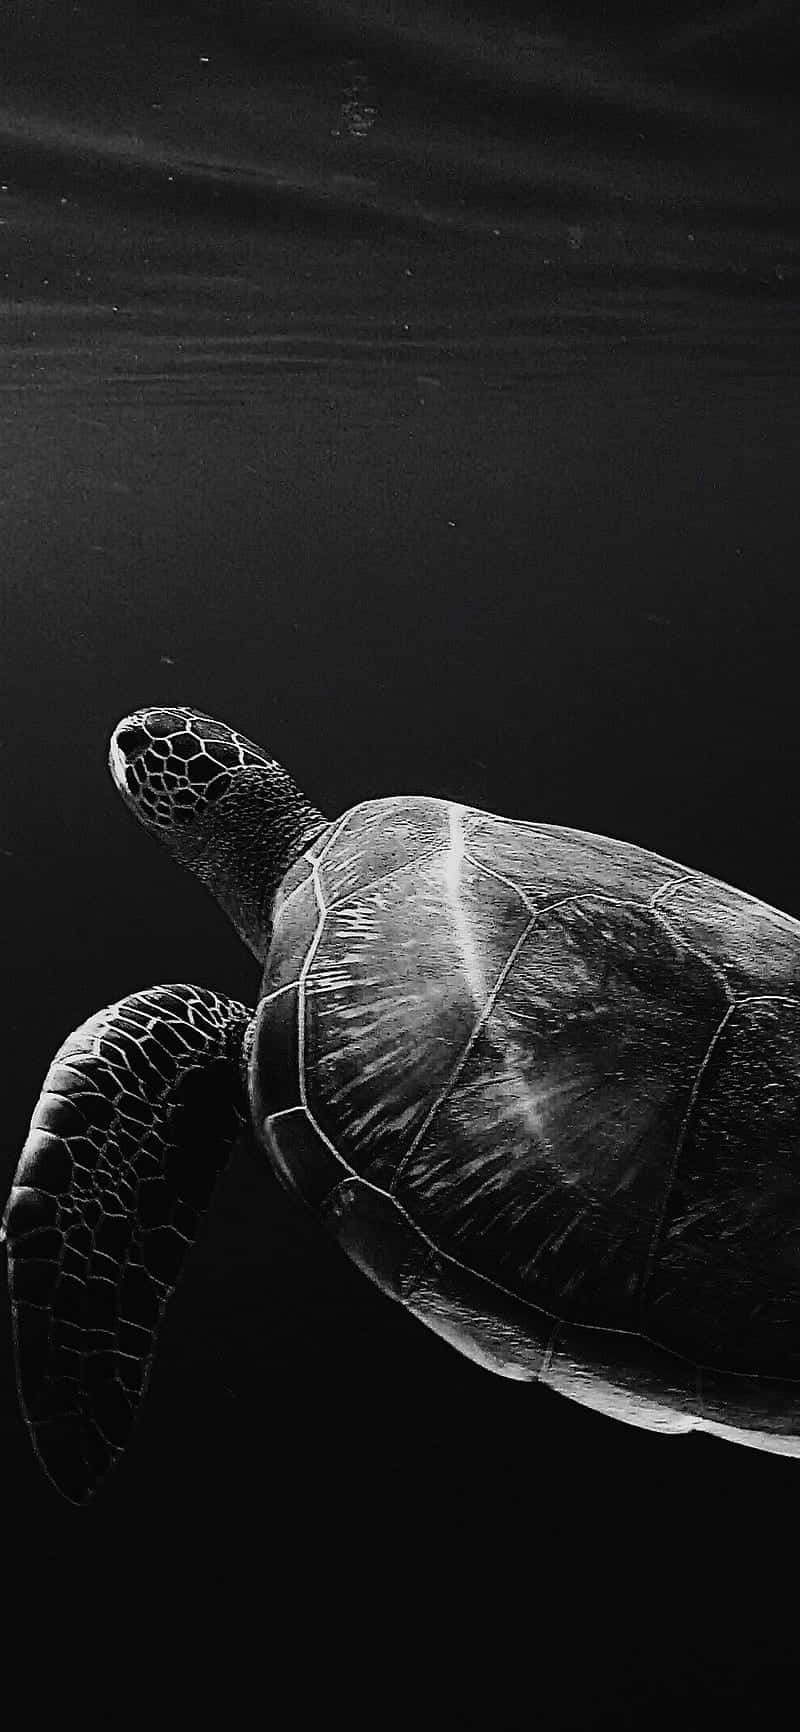 A Turtle Swimming In The Ocean In Black And White Wallpaper